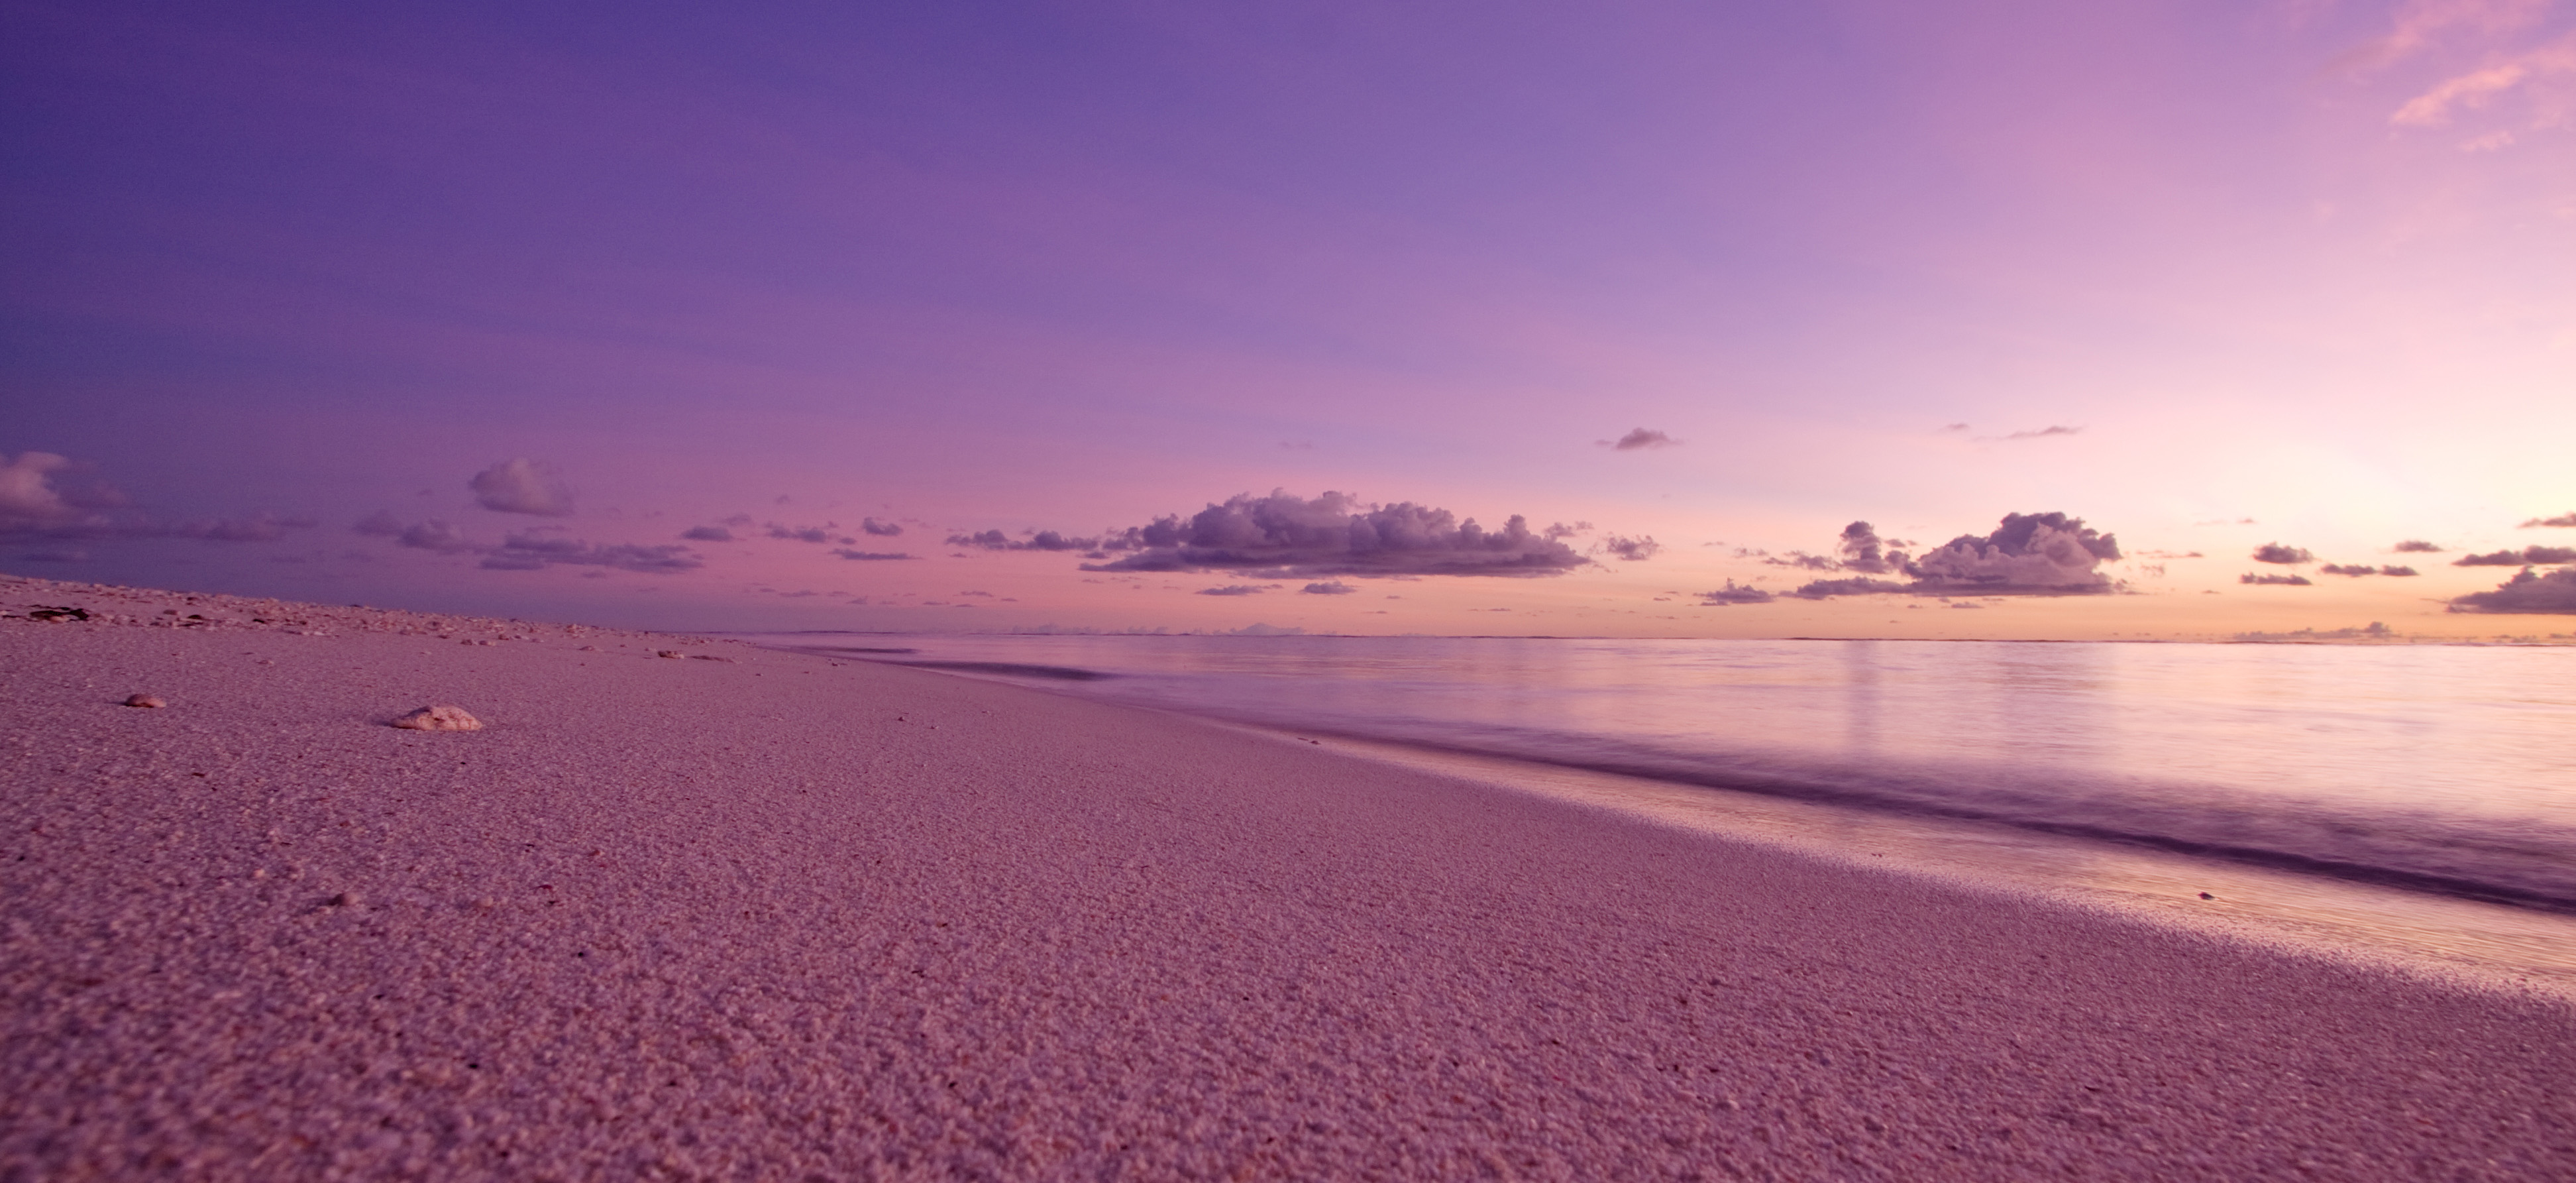 stunning places to watch the sunset in seychelles - west beach bird island